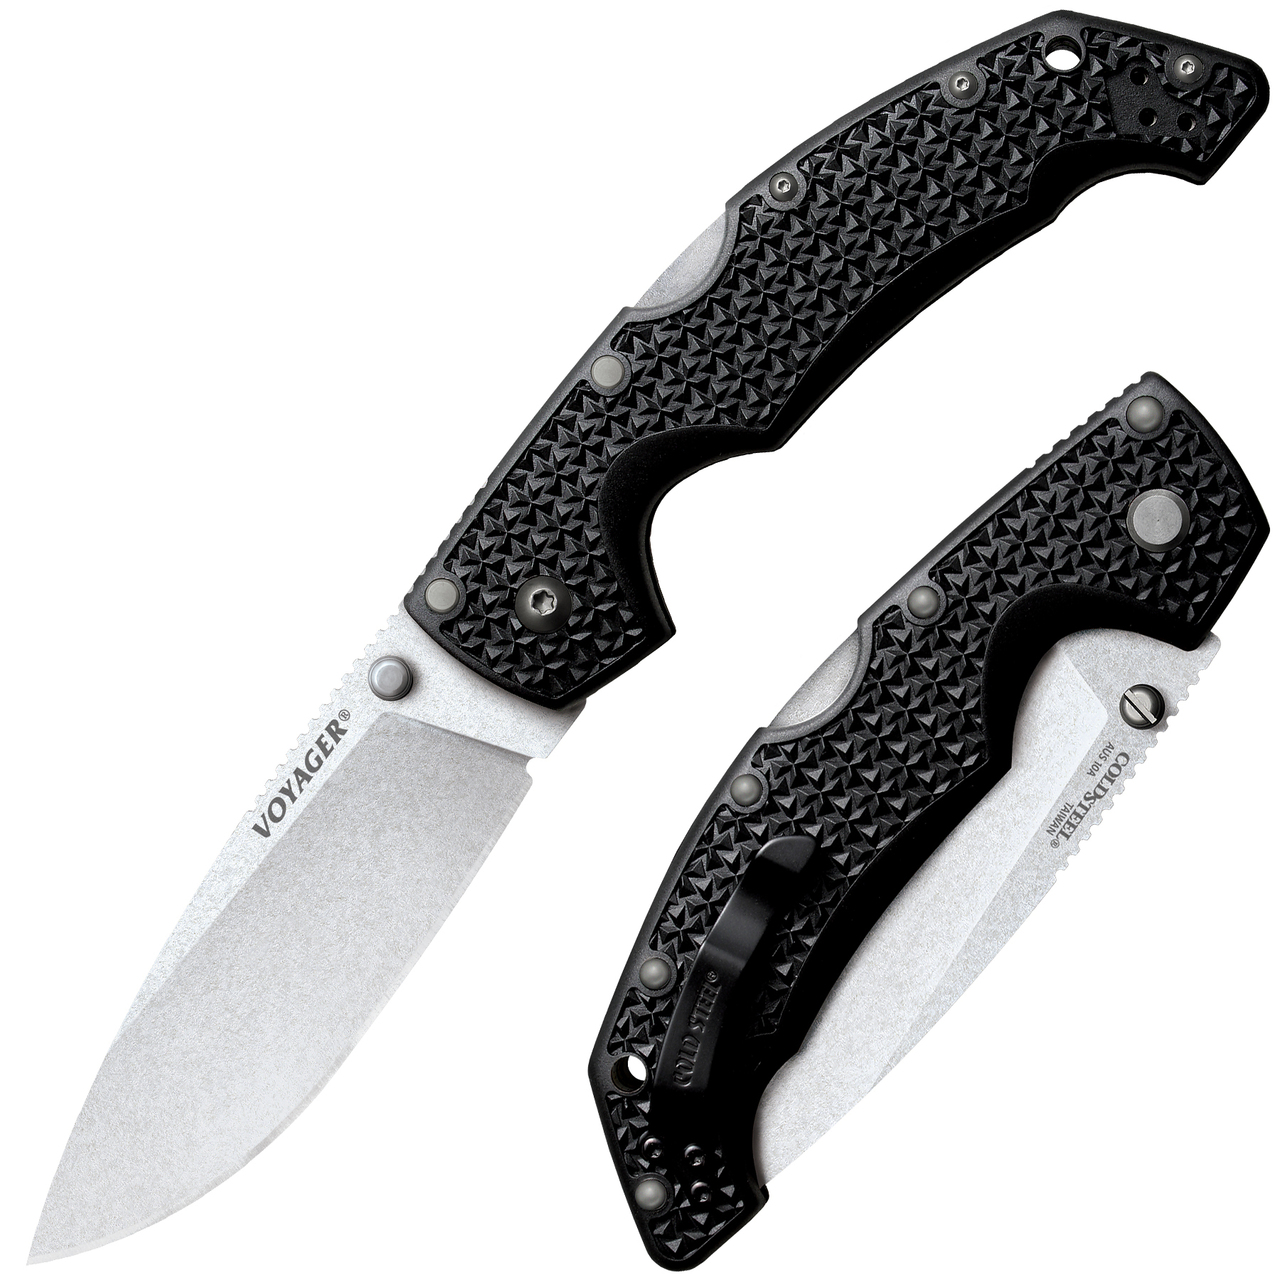 COLD STEEL Large Voyager Lockback 29AB Knife AUS10A Stainless Steel Drop Point Pocket Knives